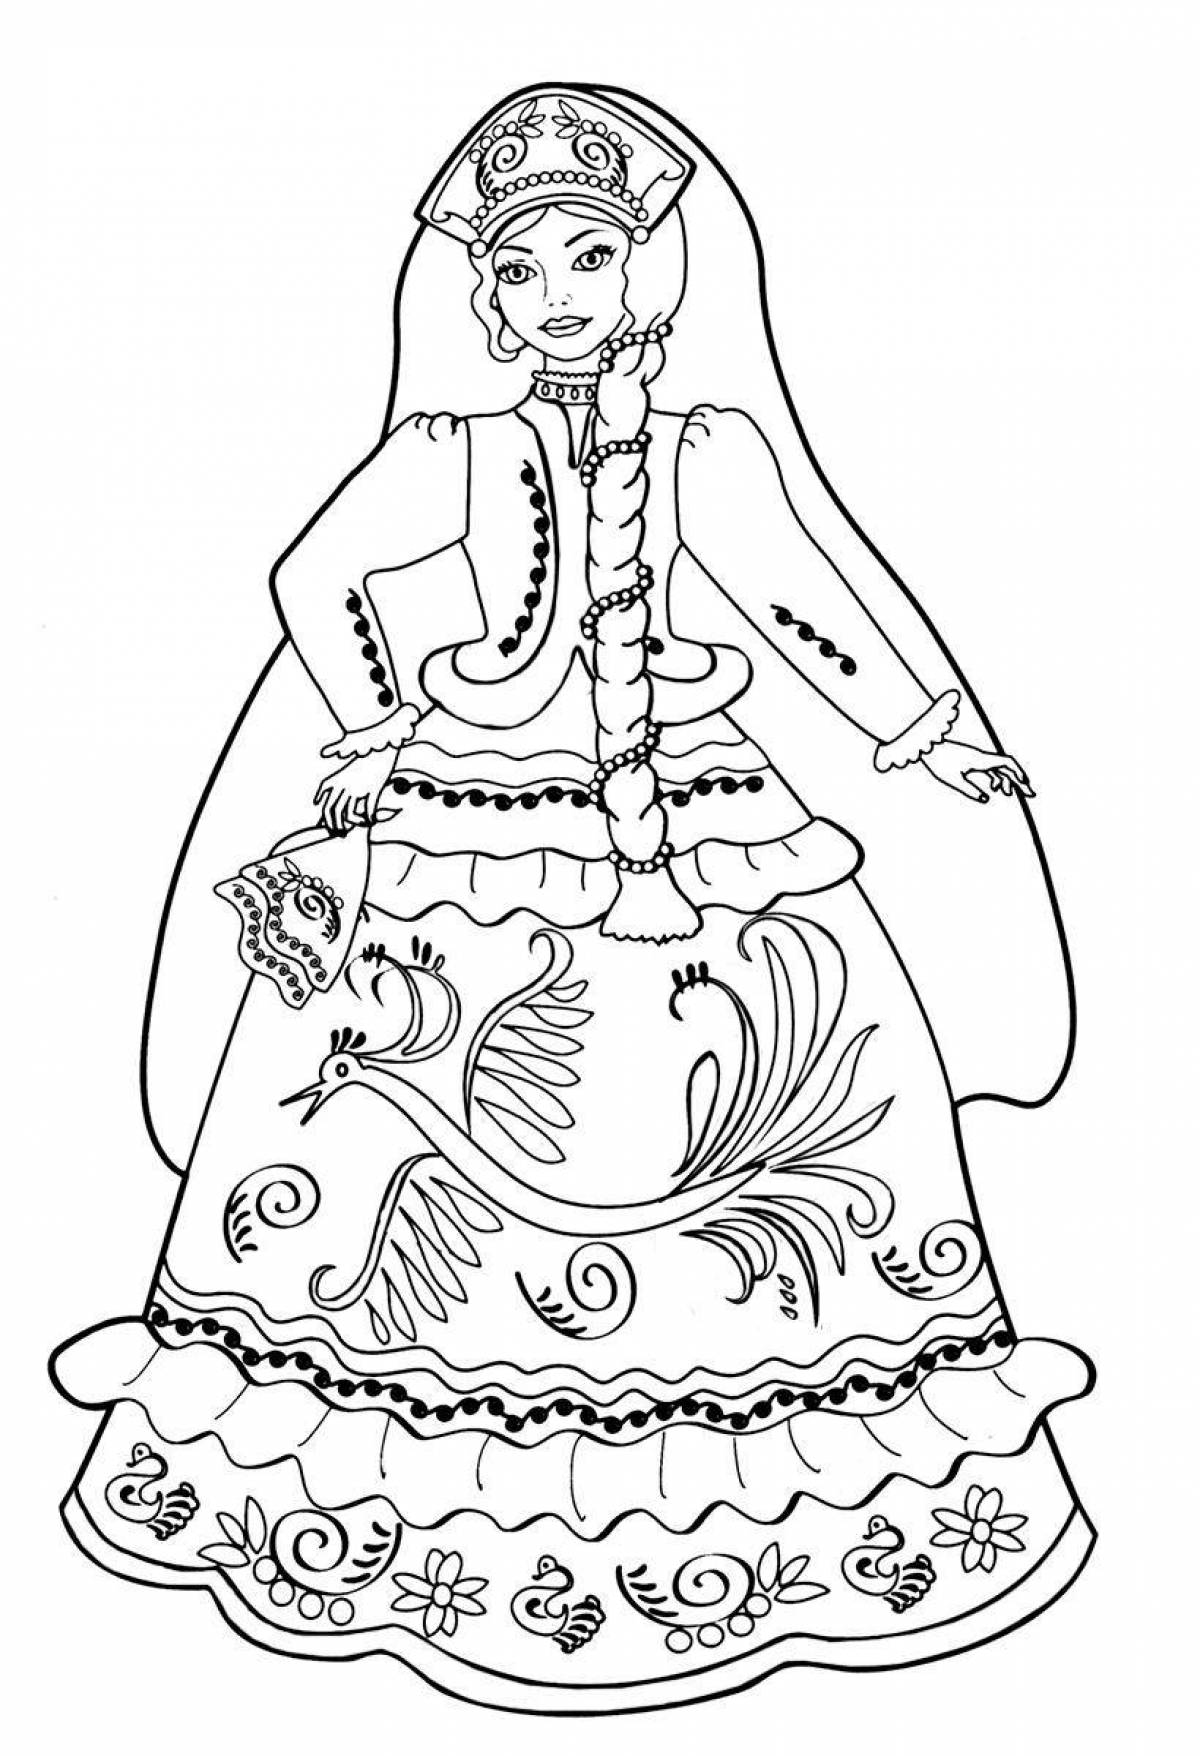 Coloring page charming Russian girl